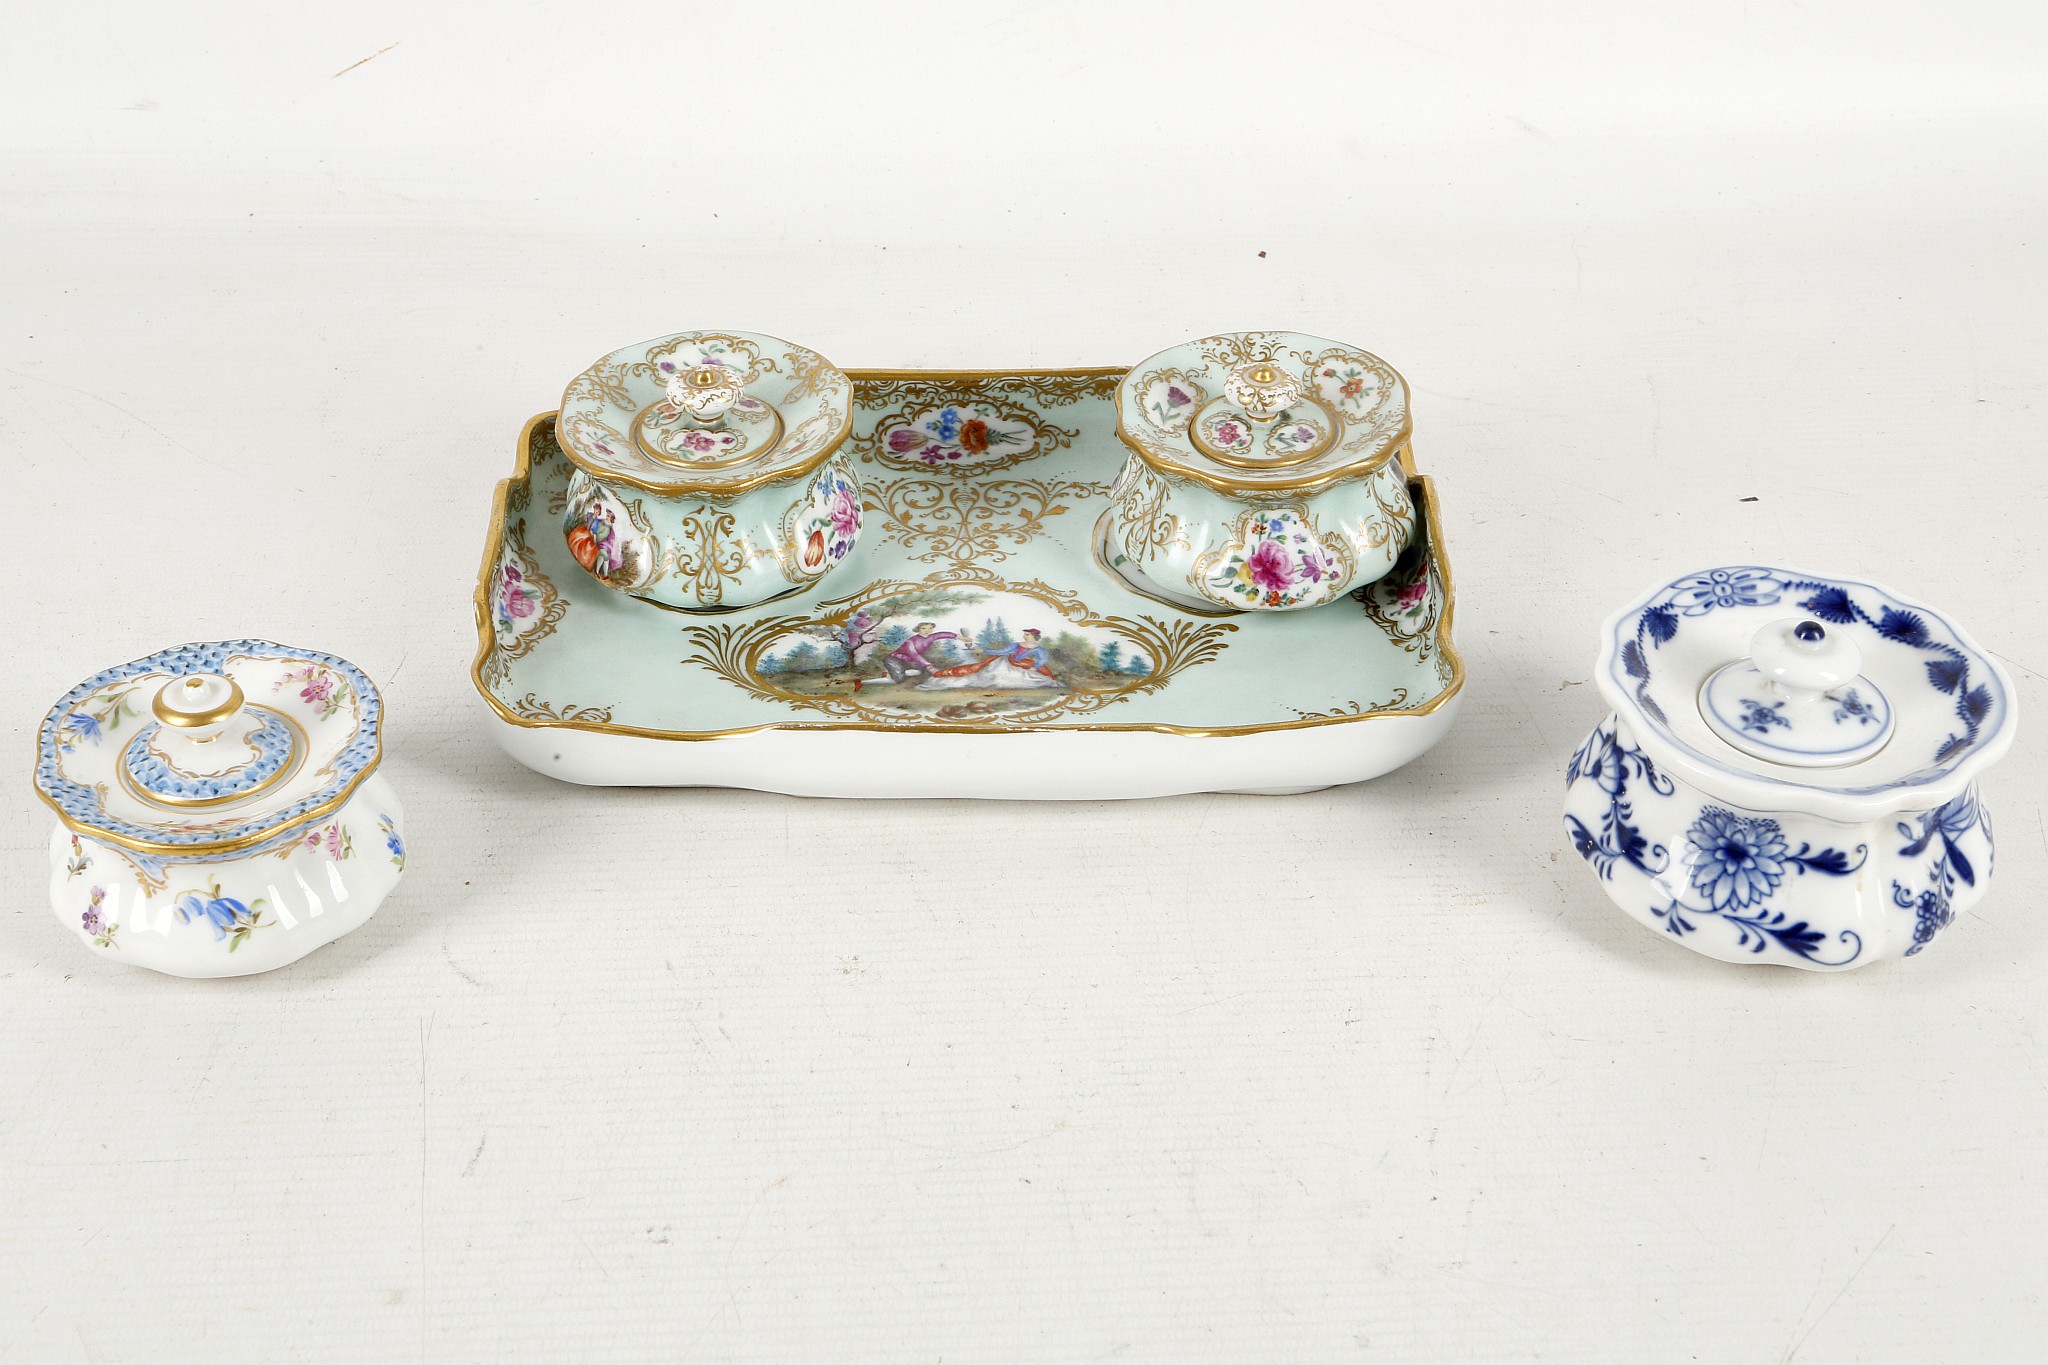 A 19th century Meissen porcelain pair of inkwells on matching trays, pale turquoise ground with